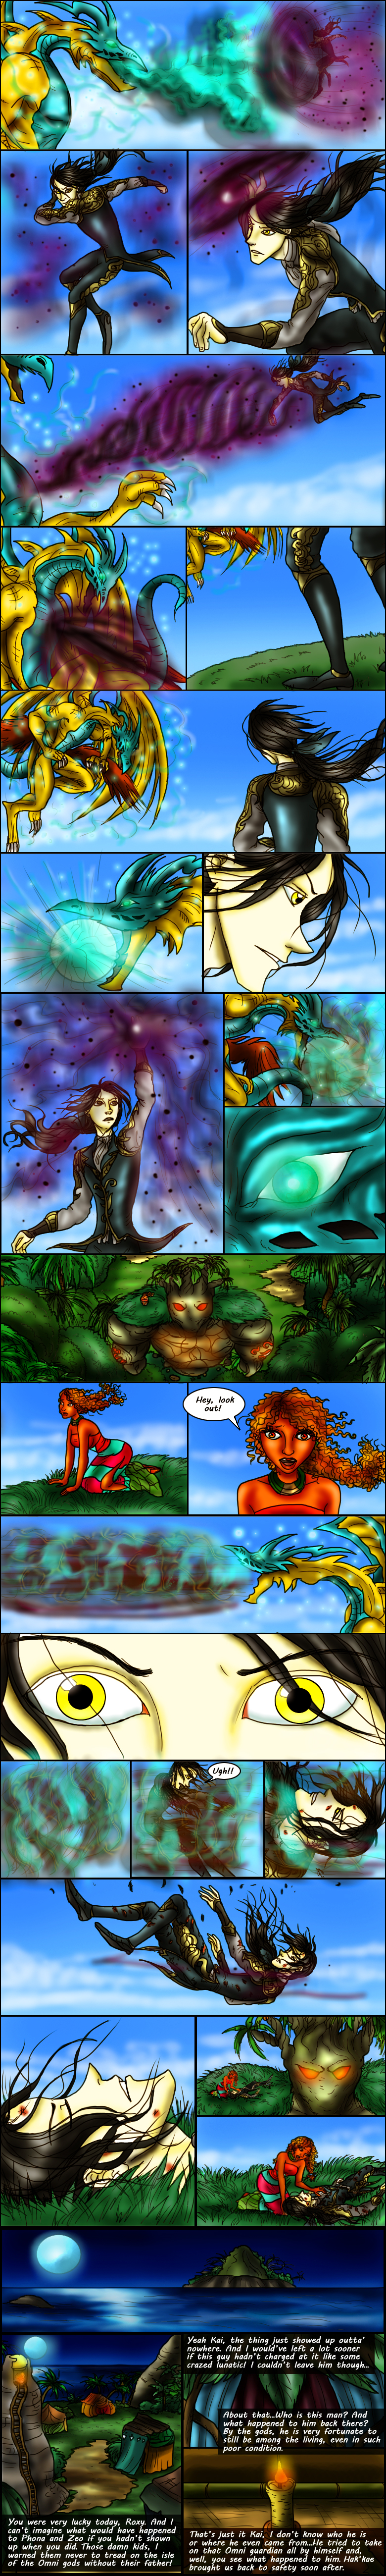 Page 20 – The Wrath of an Omni God